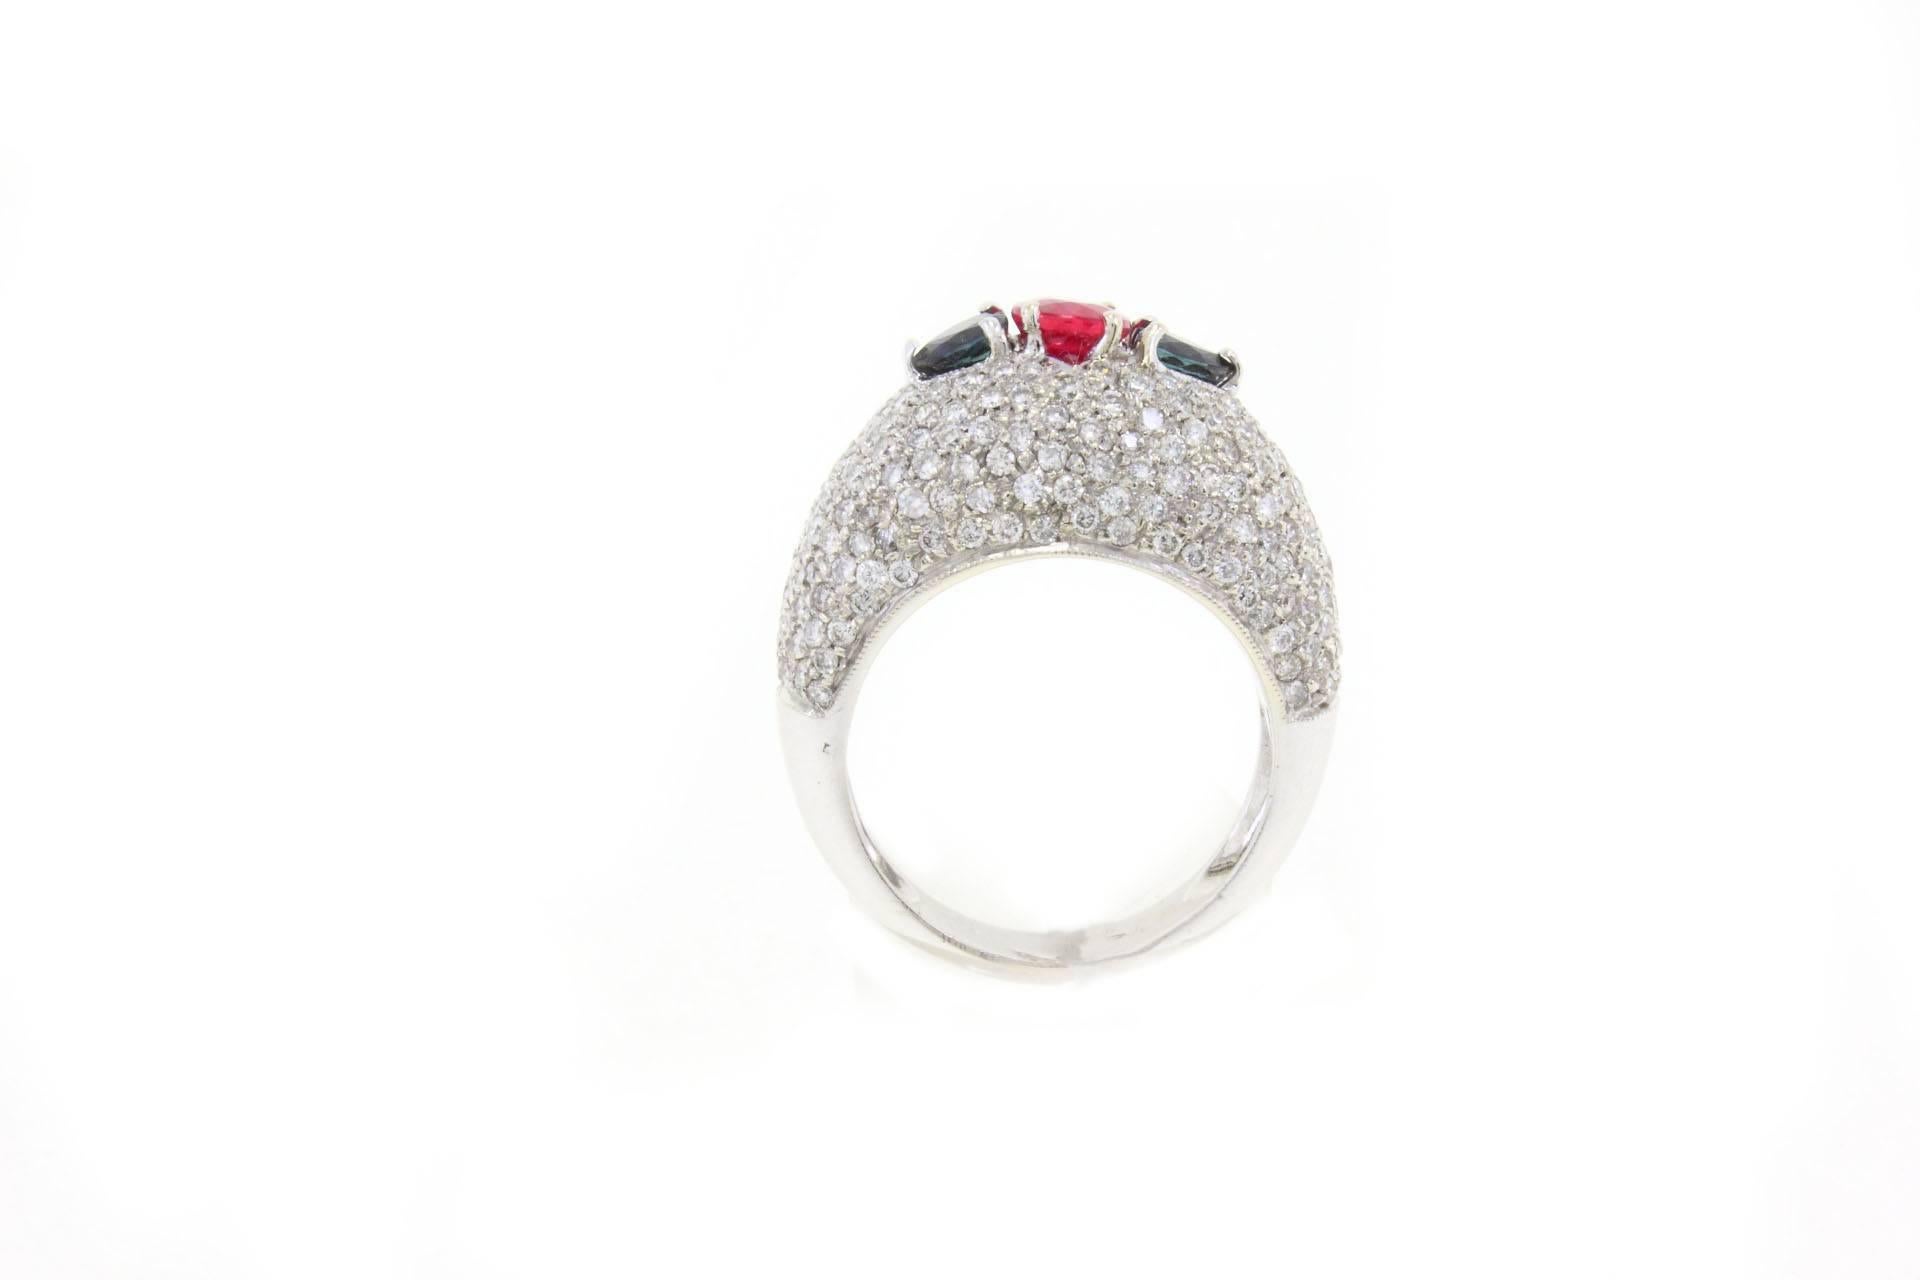 Retro 3.20 ct Diamonds, 2.15 ct Central Ruby and Blue Sapphires, White Gold Dome Ring